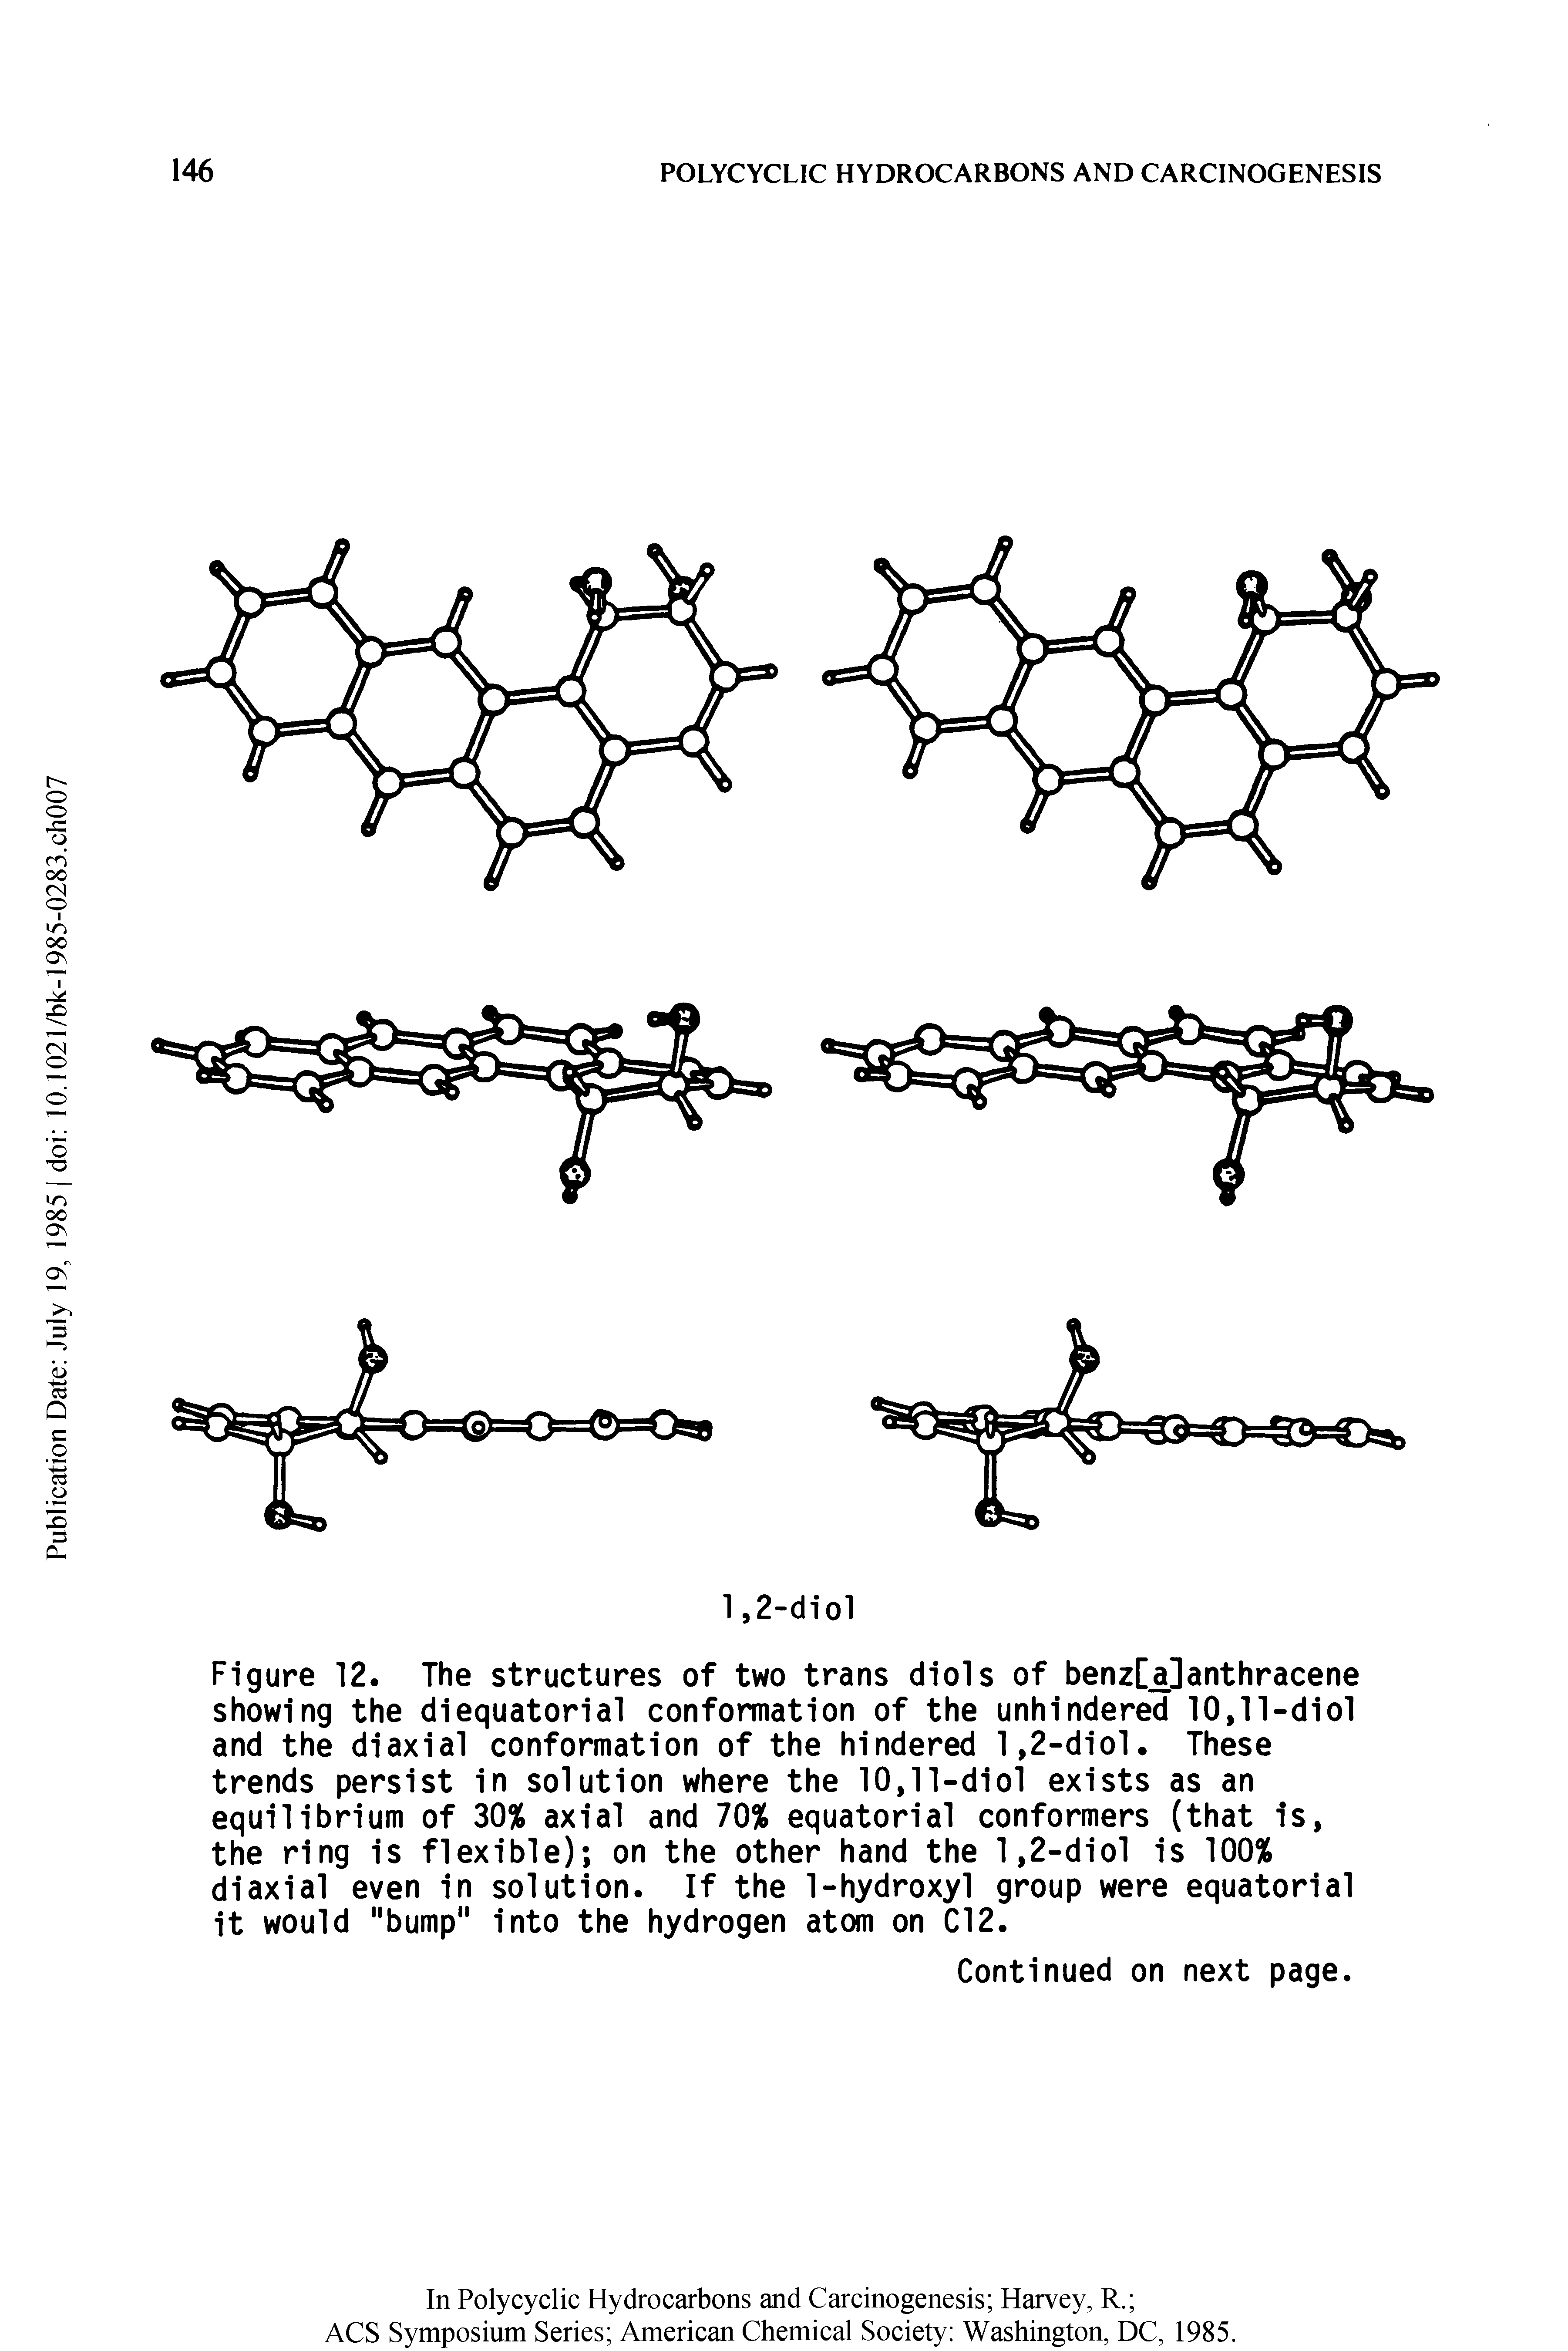 Figure 12. The structures of two trans diols of benz[a]anthracene showing the diequatorial conformation of the unhindered 10,11-diol and the diaxial conformation of the hindered 1,2-diol. These trends persist in solution where the 10,11-diol exists as an equilibrium of 30% axial and 70% equatorial conformers (that is, the ring is flexible) on the other hand the 1,2-diol is 100% diaxial even in solution. If the 1-hydroxyl group were equatorial it would "bump" into the hydrogen atom on Cl2.